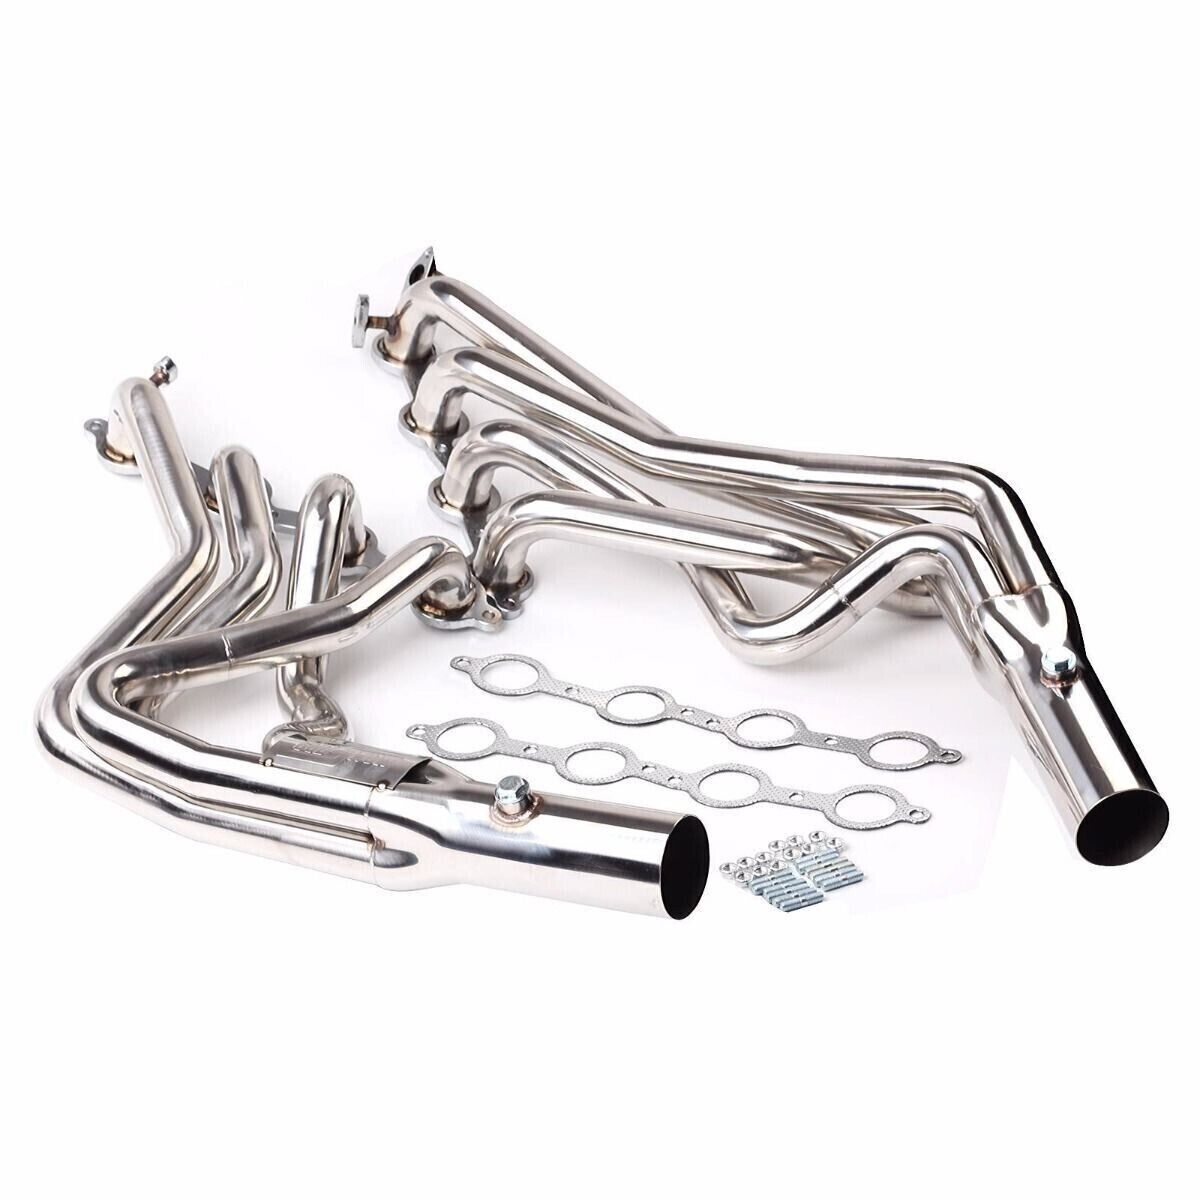 STAINLESS EXHAUST HEADER FOR 1998-2002 CHEVY CAMARO LS1 5.7L V8